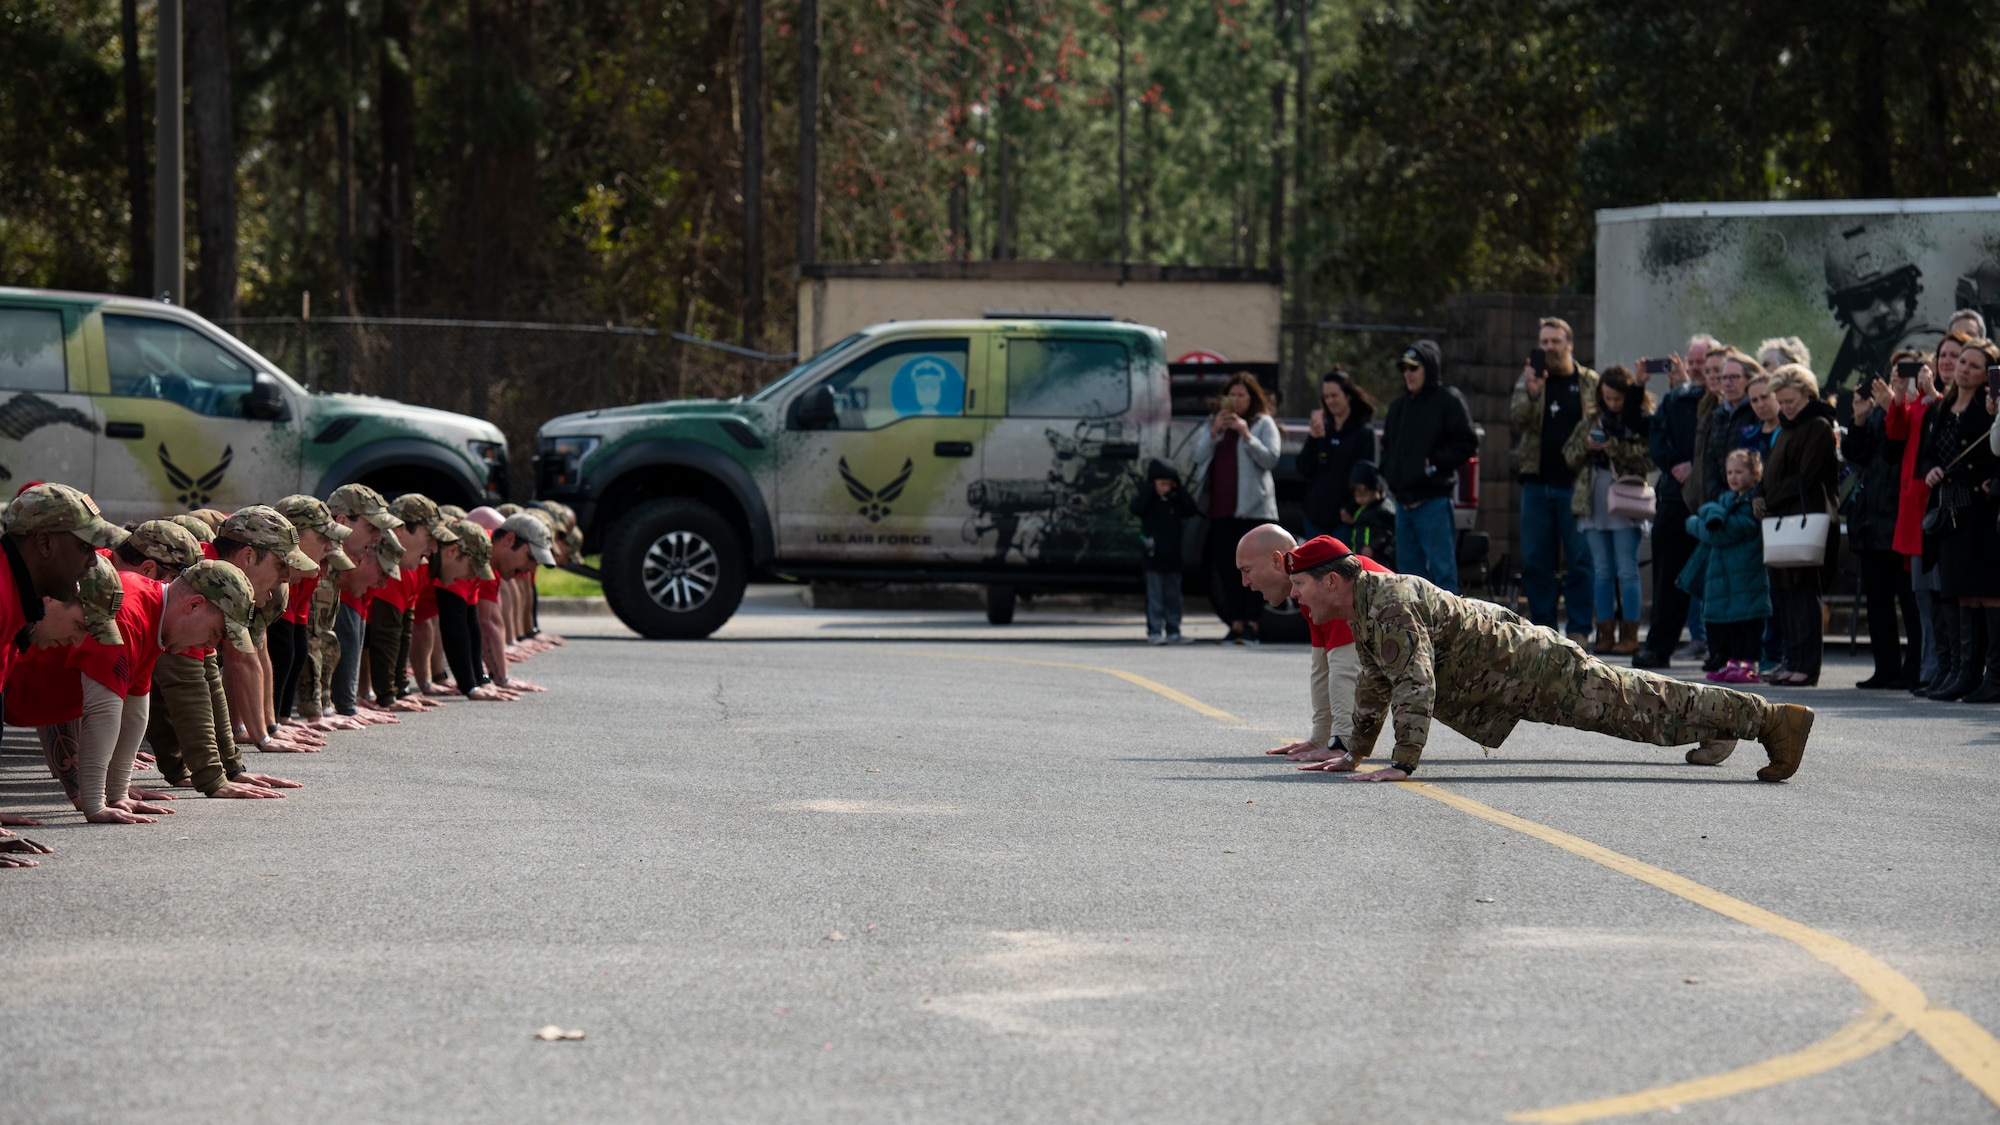 Special Tactics senior leaders with the 24th Special Operations Wing lead hundreds of Air Commandos, teammates and family in performing memorial push-ups following the Special Tactics Ruck March Memorial Ceremony at Hurlburt Field, Florida, March 4, 2018.